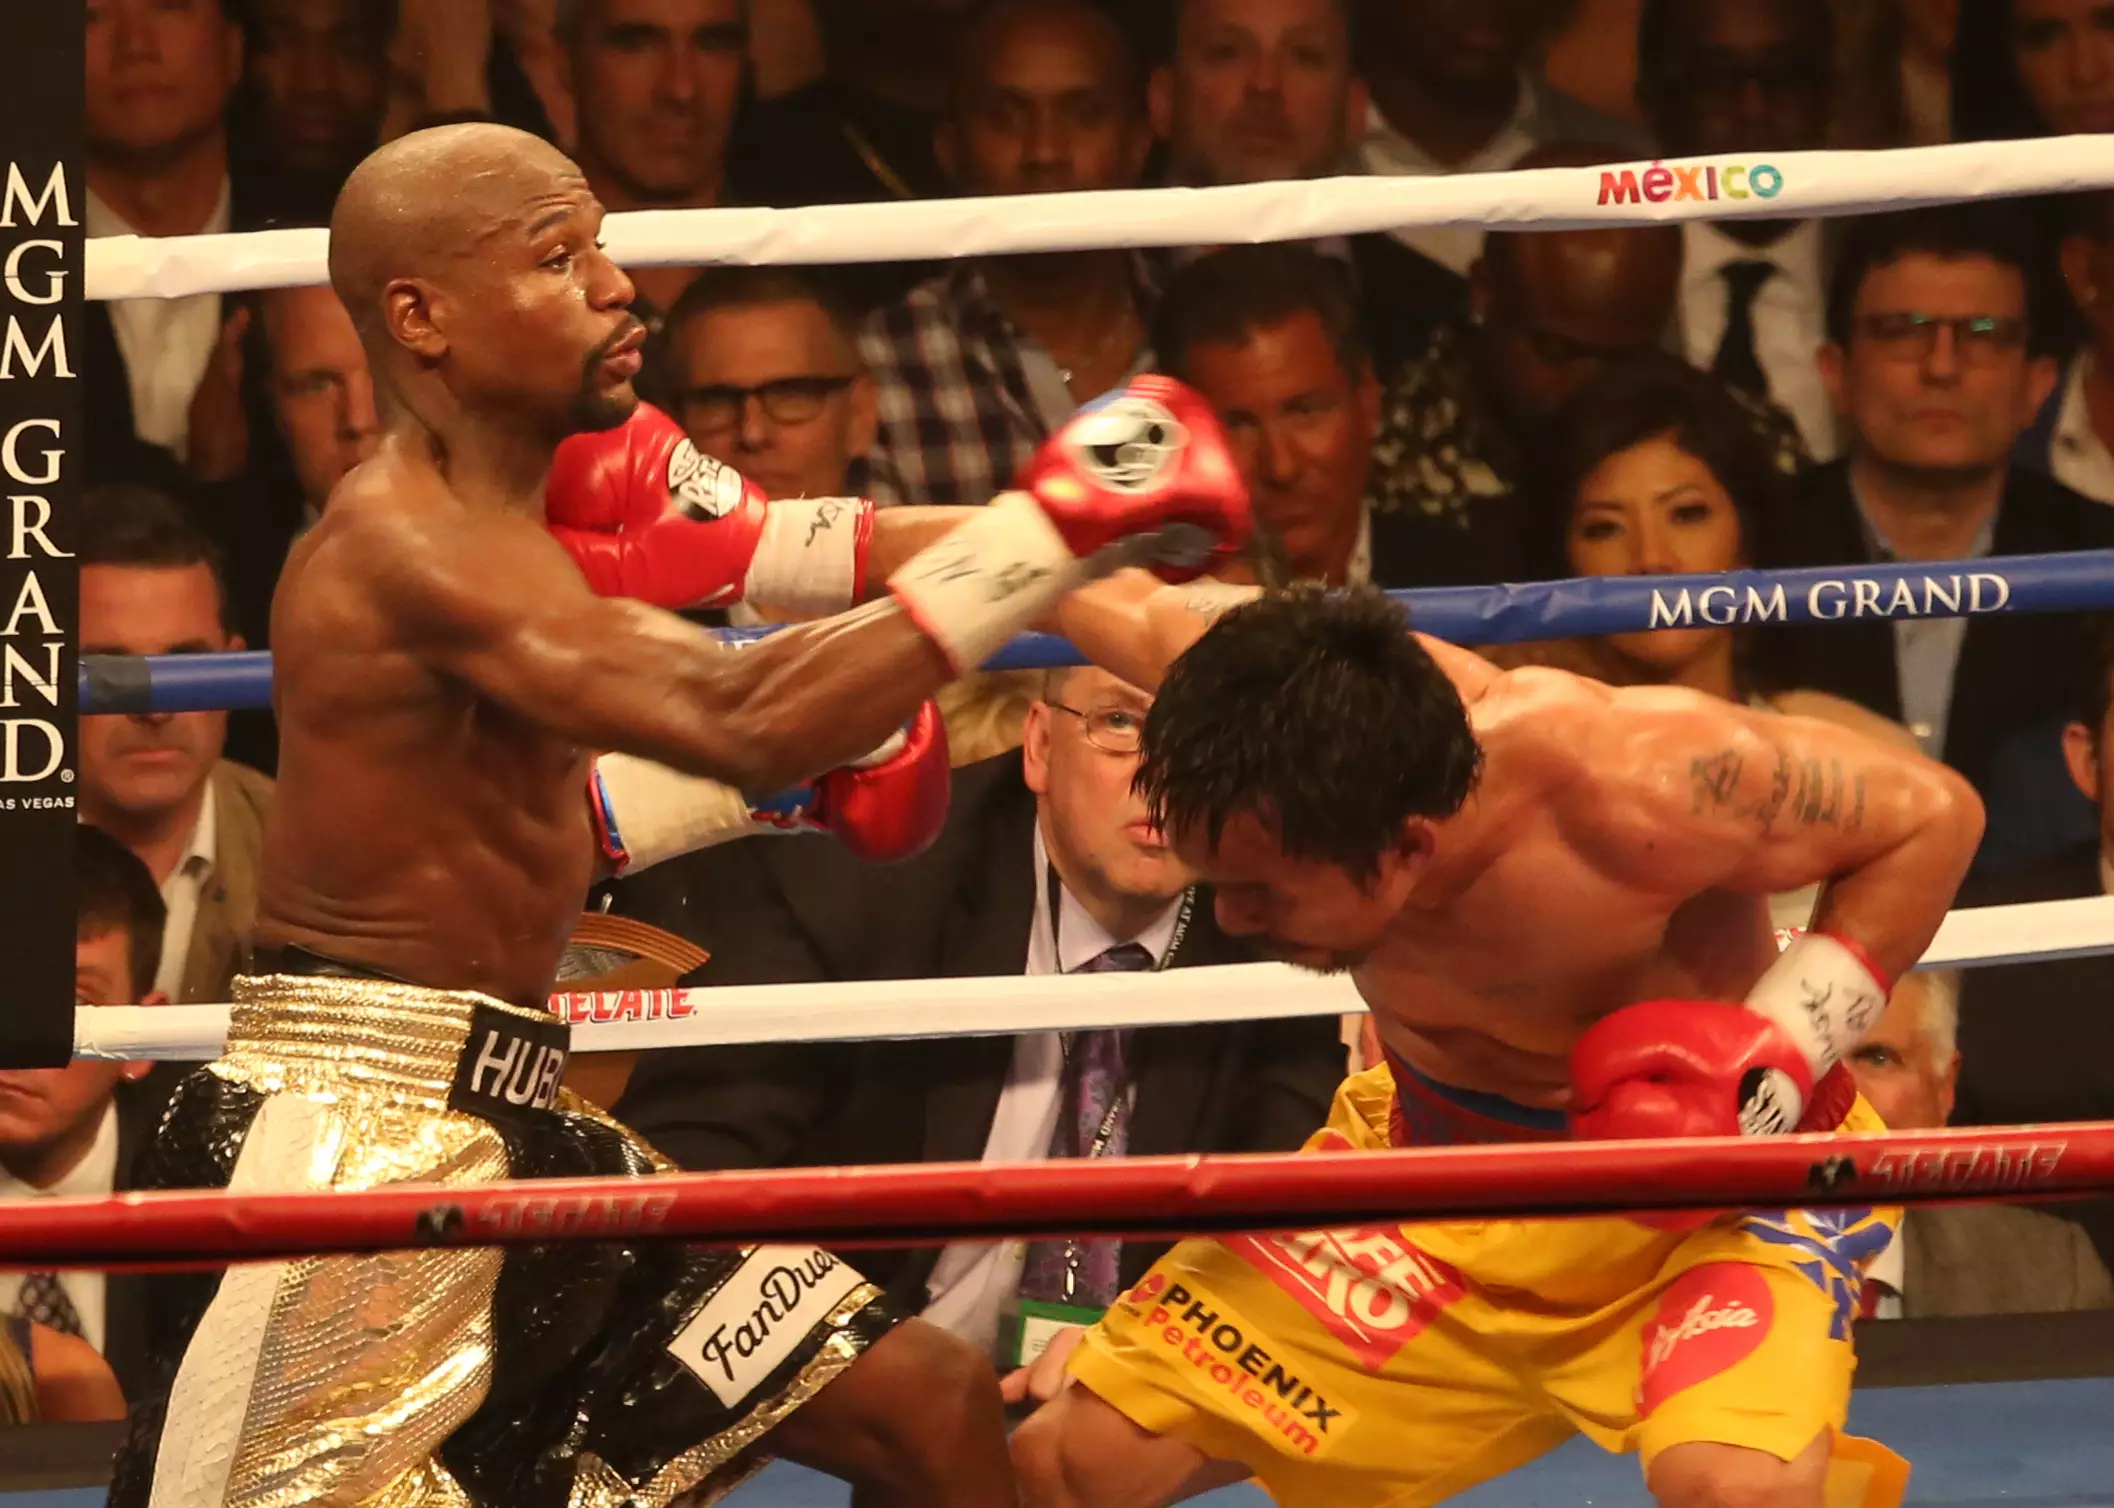 Mayweather and Pacquiao faced off back in 2015 with Mayweather coming out on top. (Image